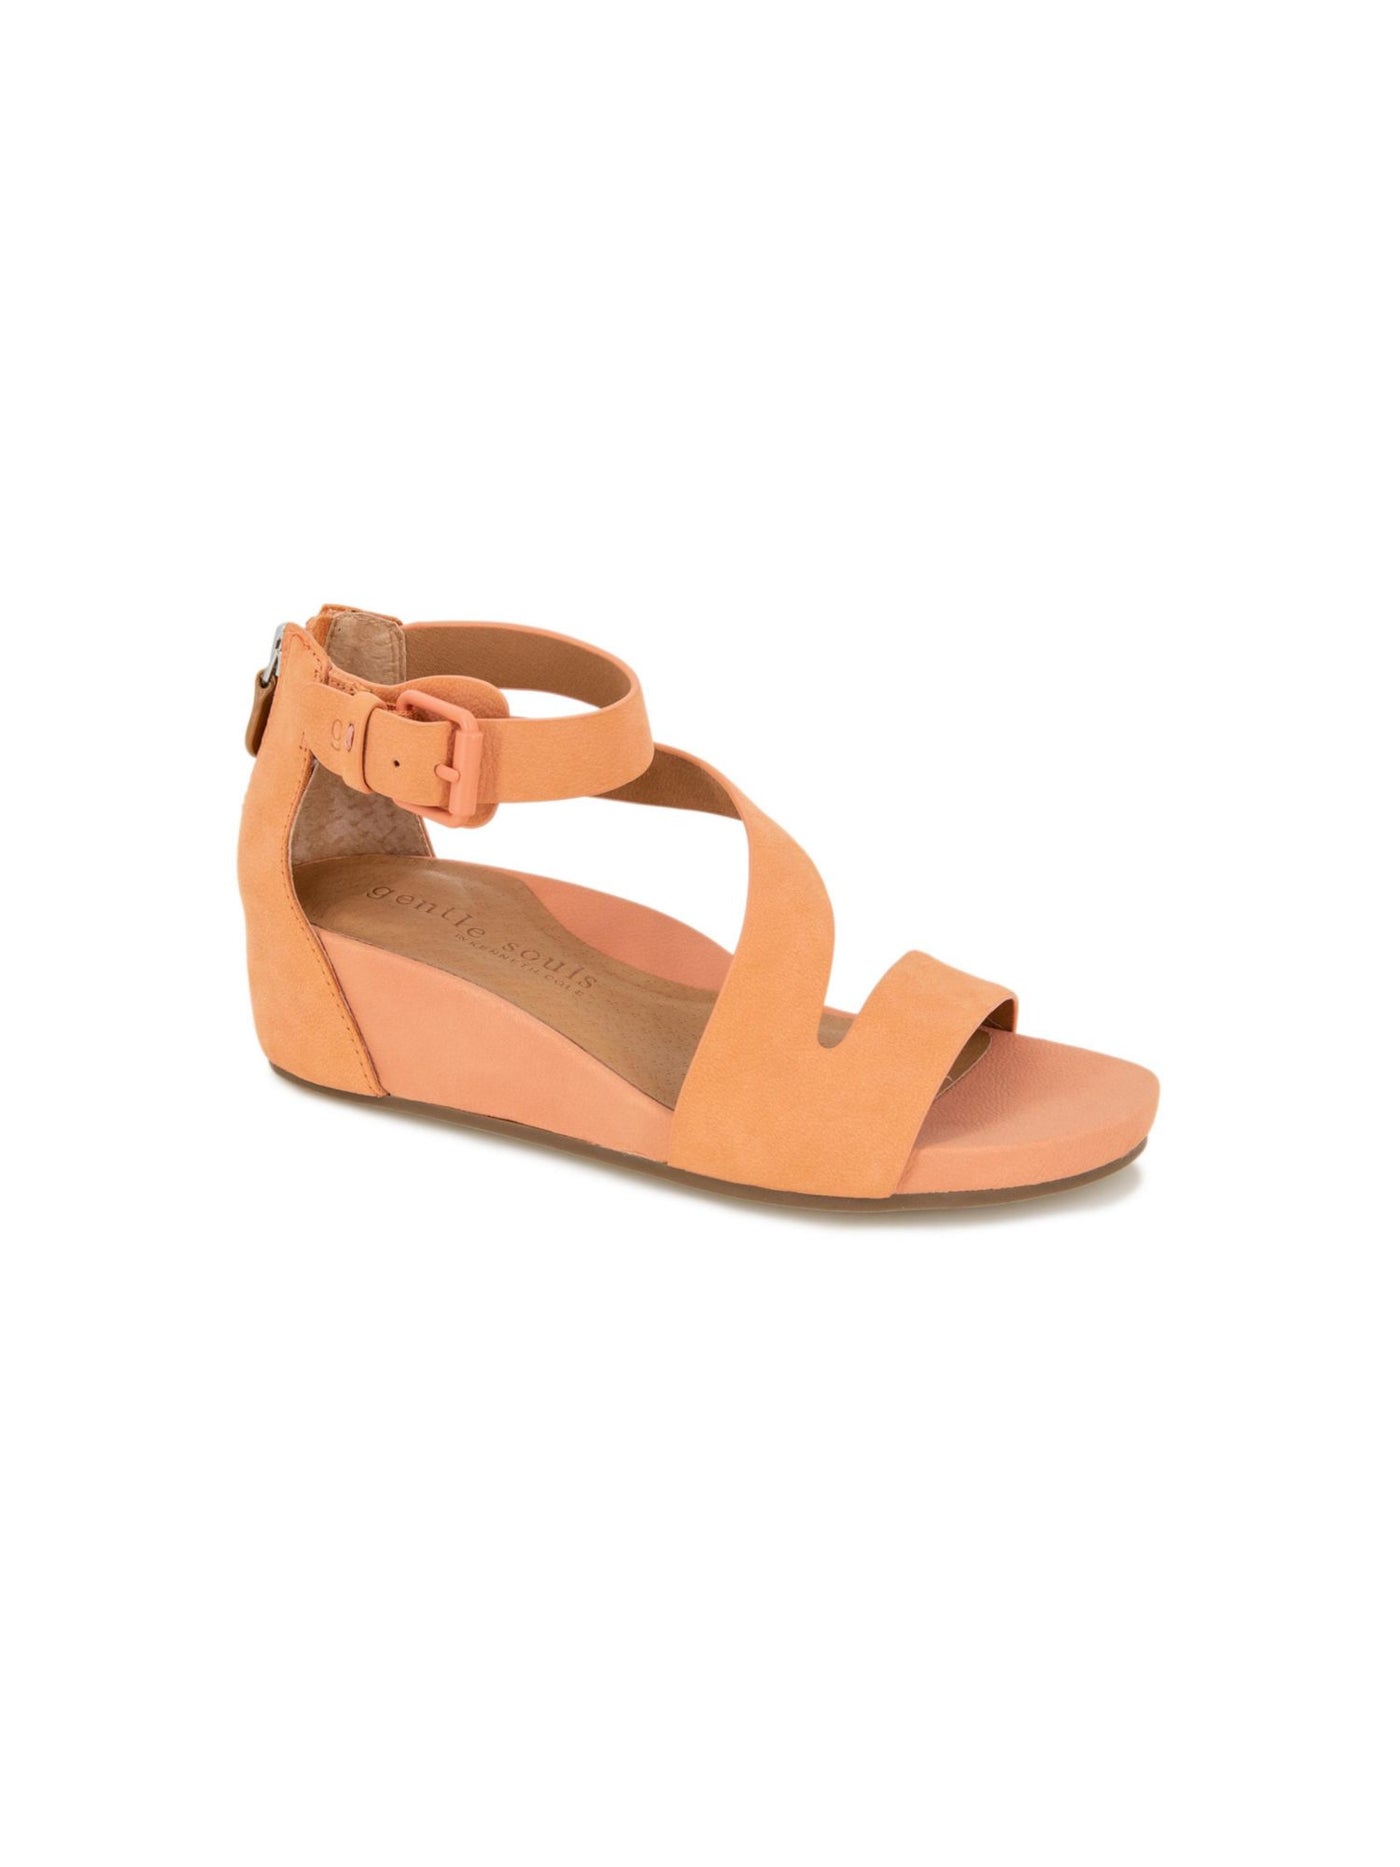 GENTLE SOULS KENNETH COLE Womens Orange Adjustable Ankle Strap Goring Asymmetrical Padded Gwen Round Toe Wedge Zip-Up Leather Sandals Shoes 9.5